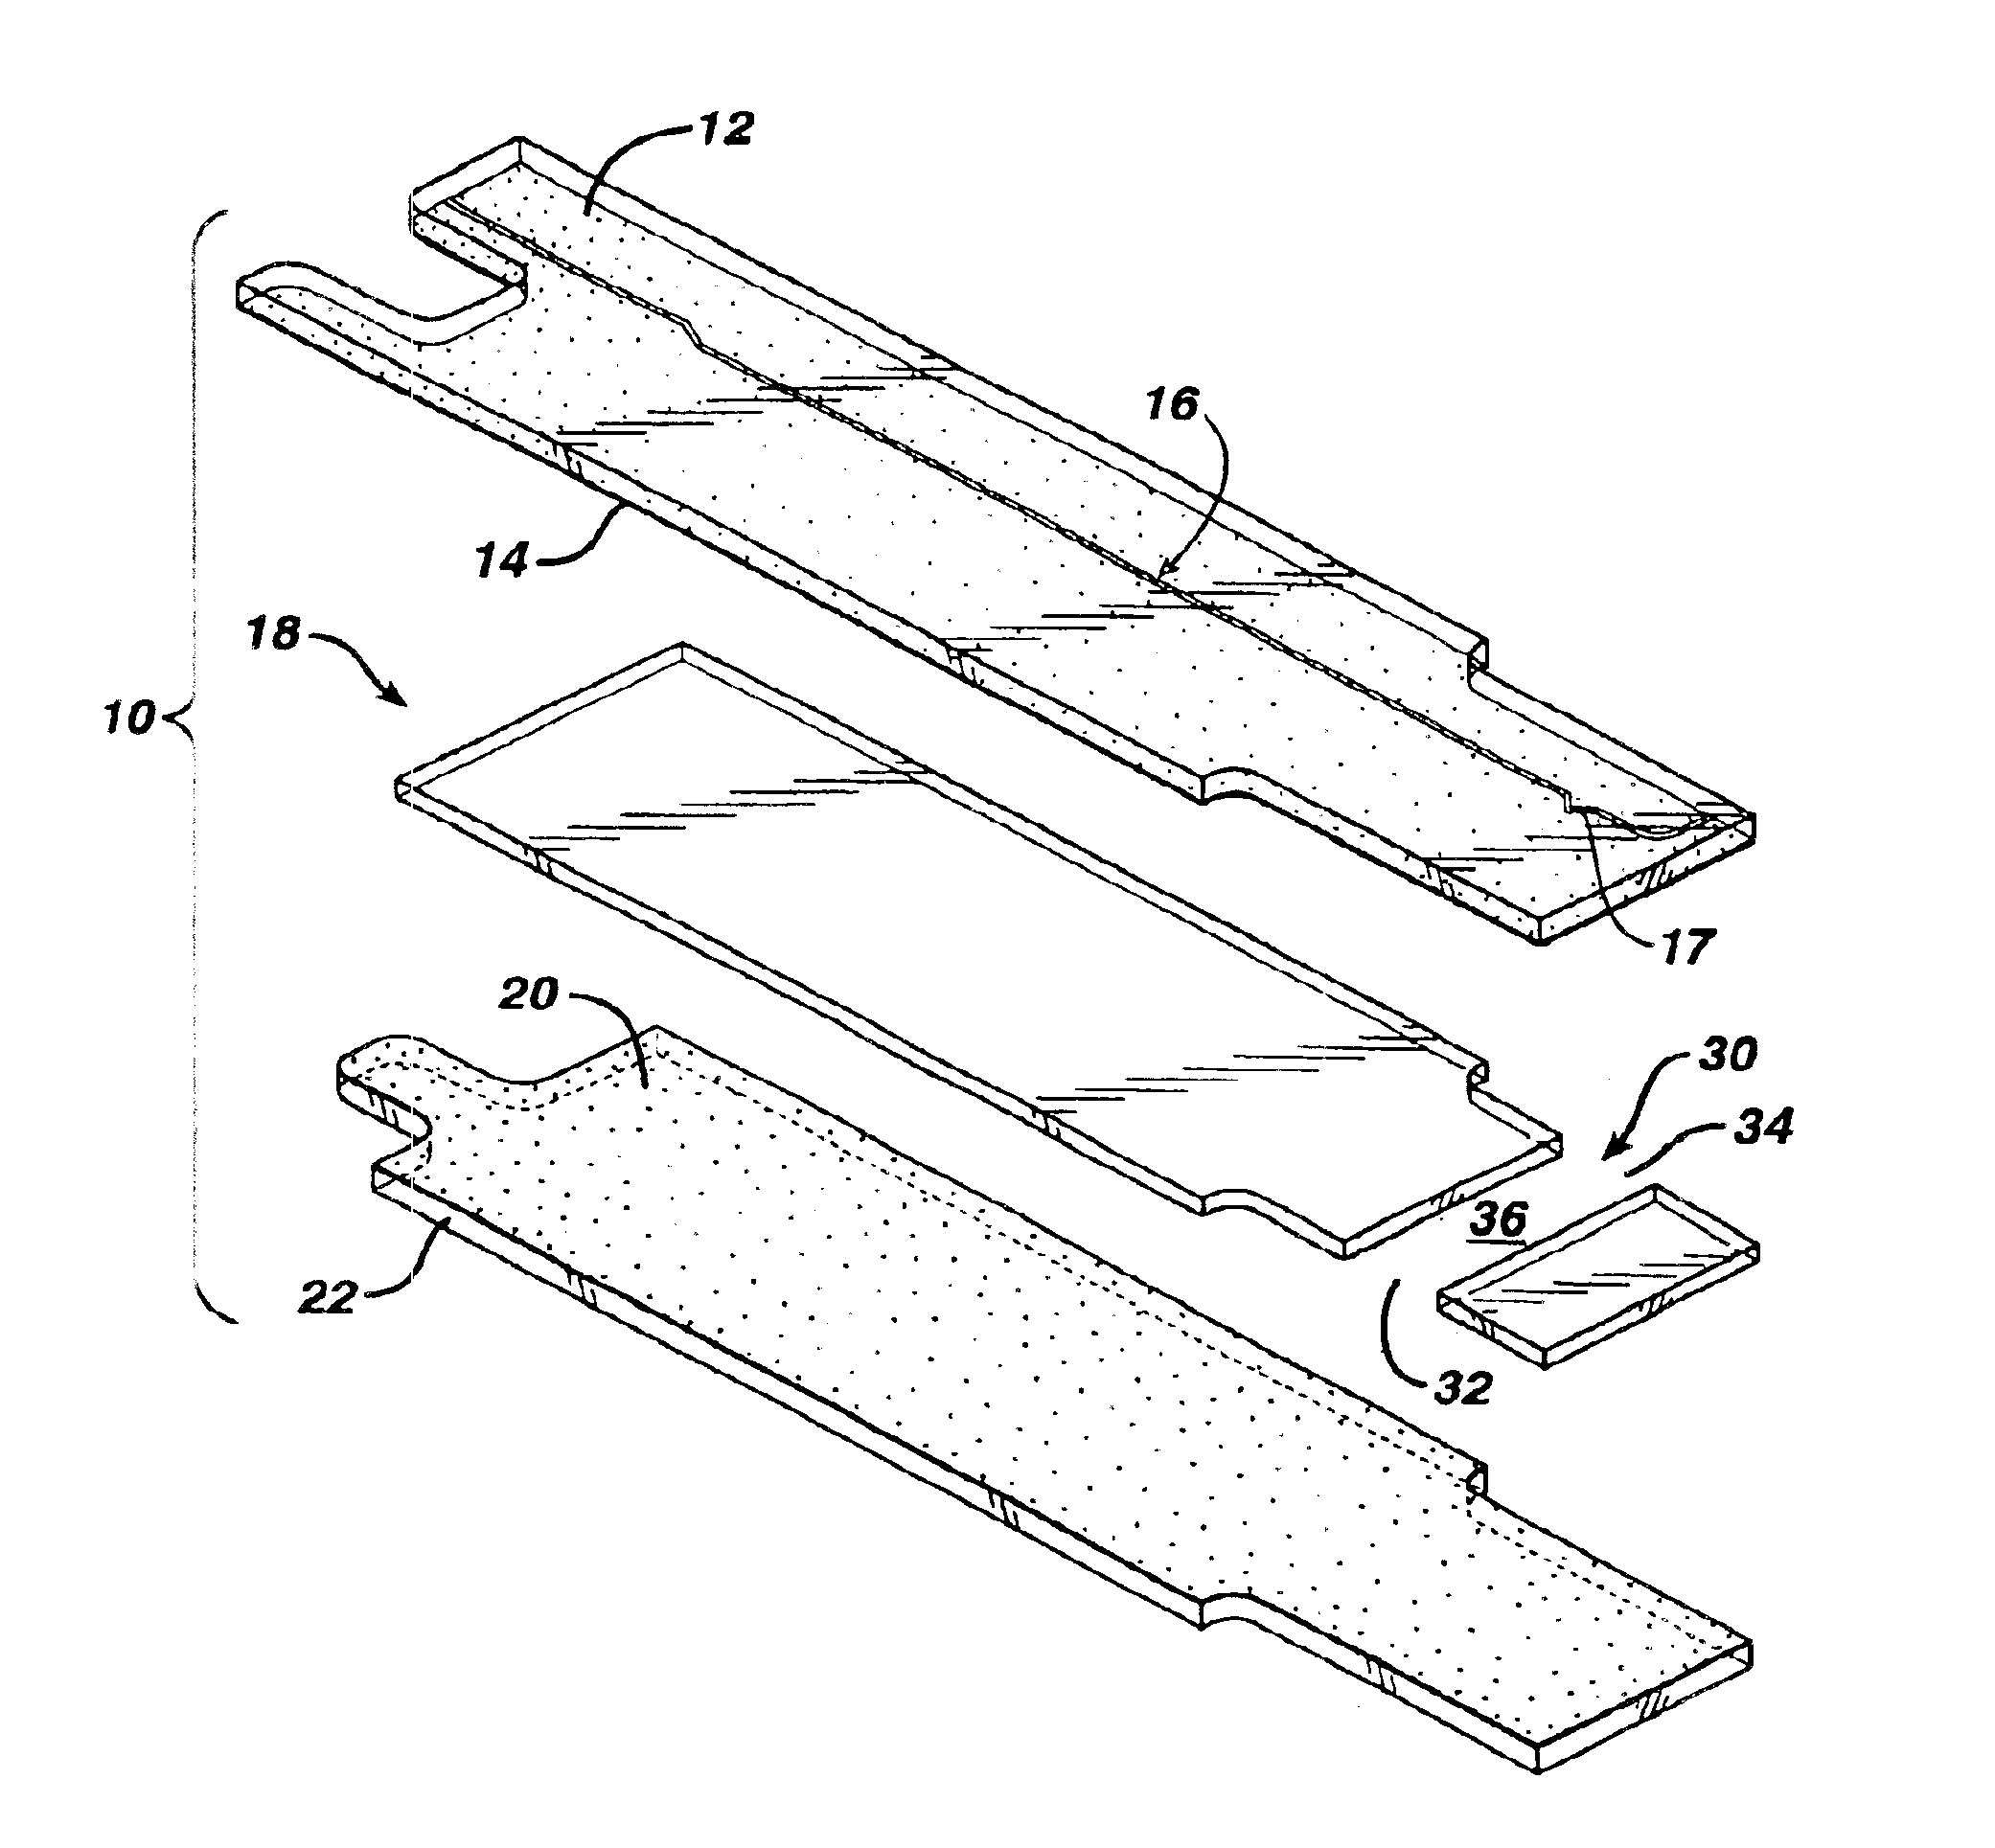 Electrically-conductive patterns for monitoring the filling of medical devices